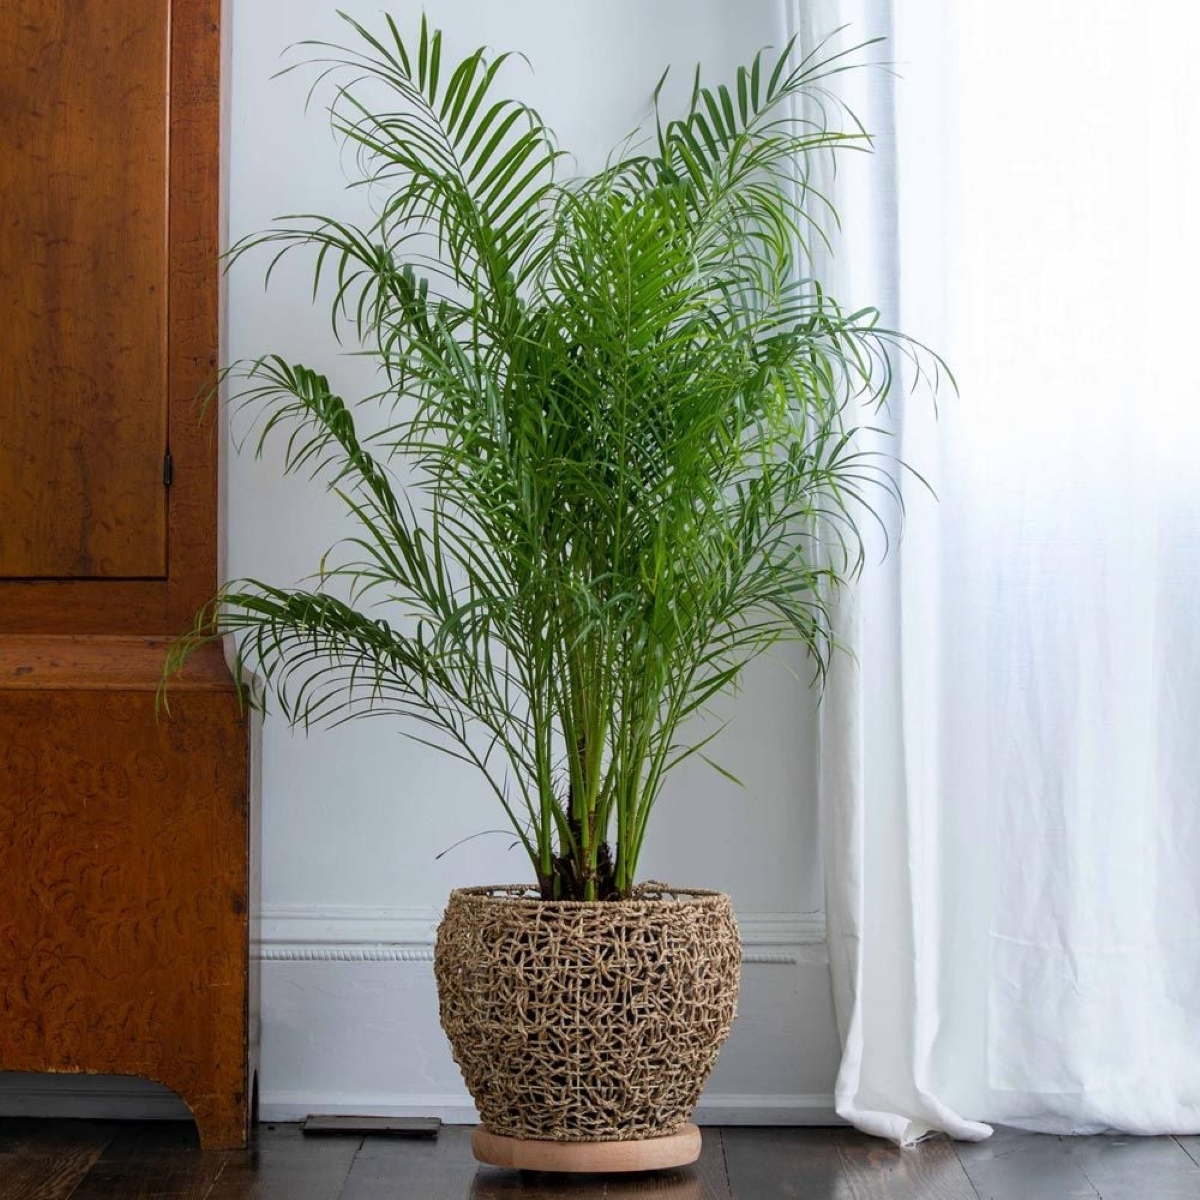 Pygmy date palm plant in woven pot.